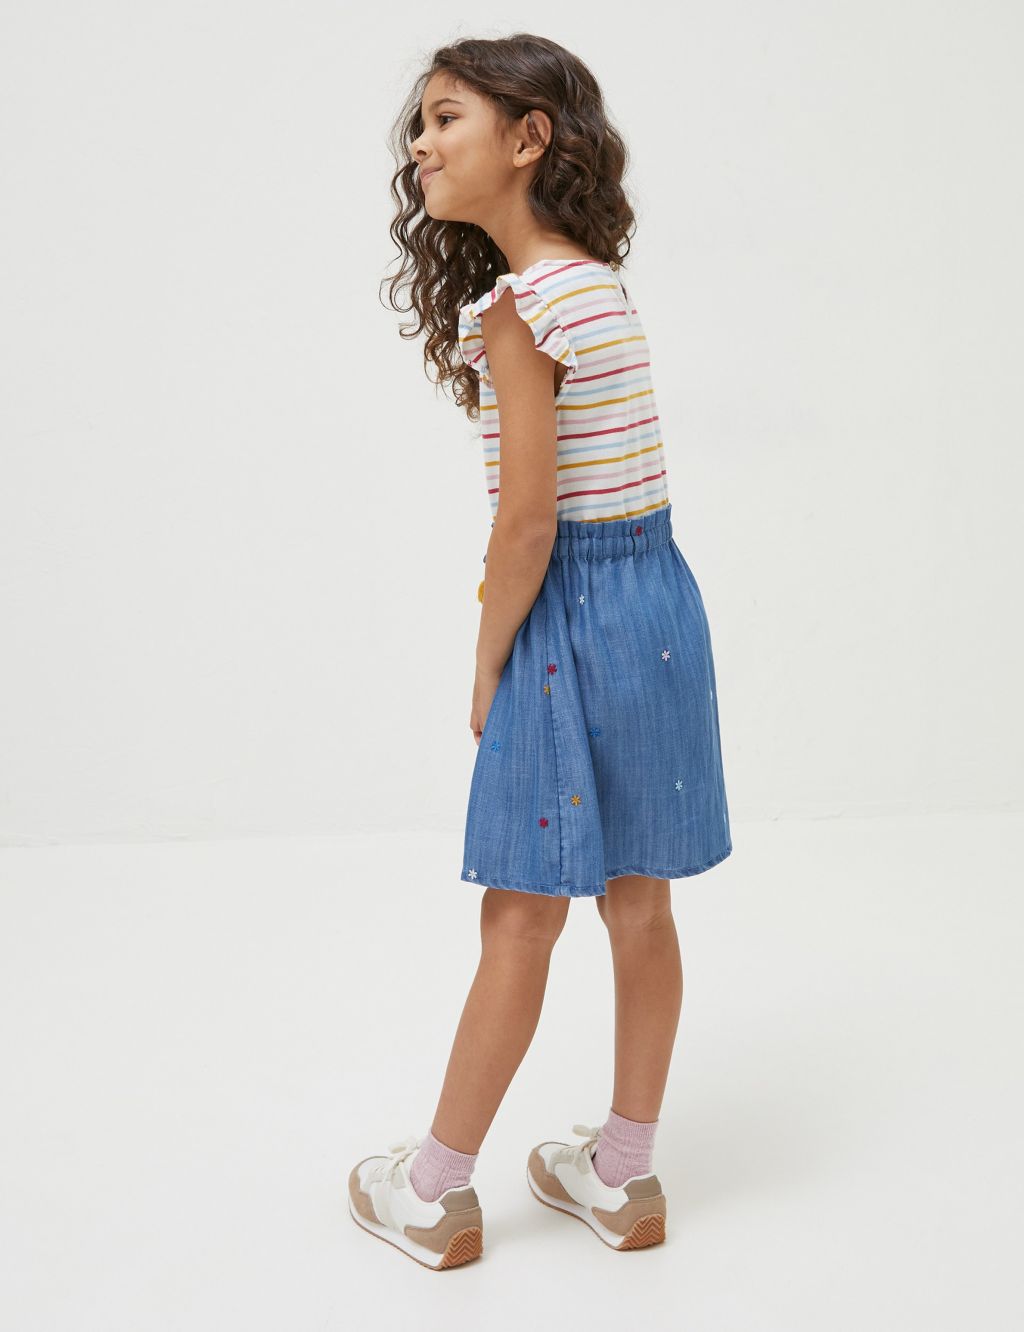 Cotton Blend Striped Embroidered Dress (3-13 Yrs) image 3